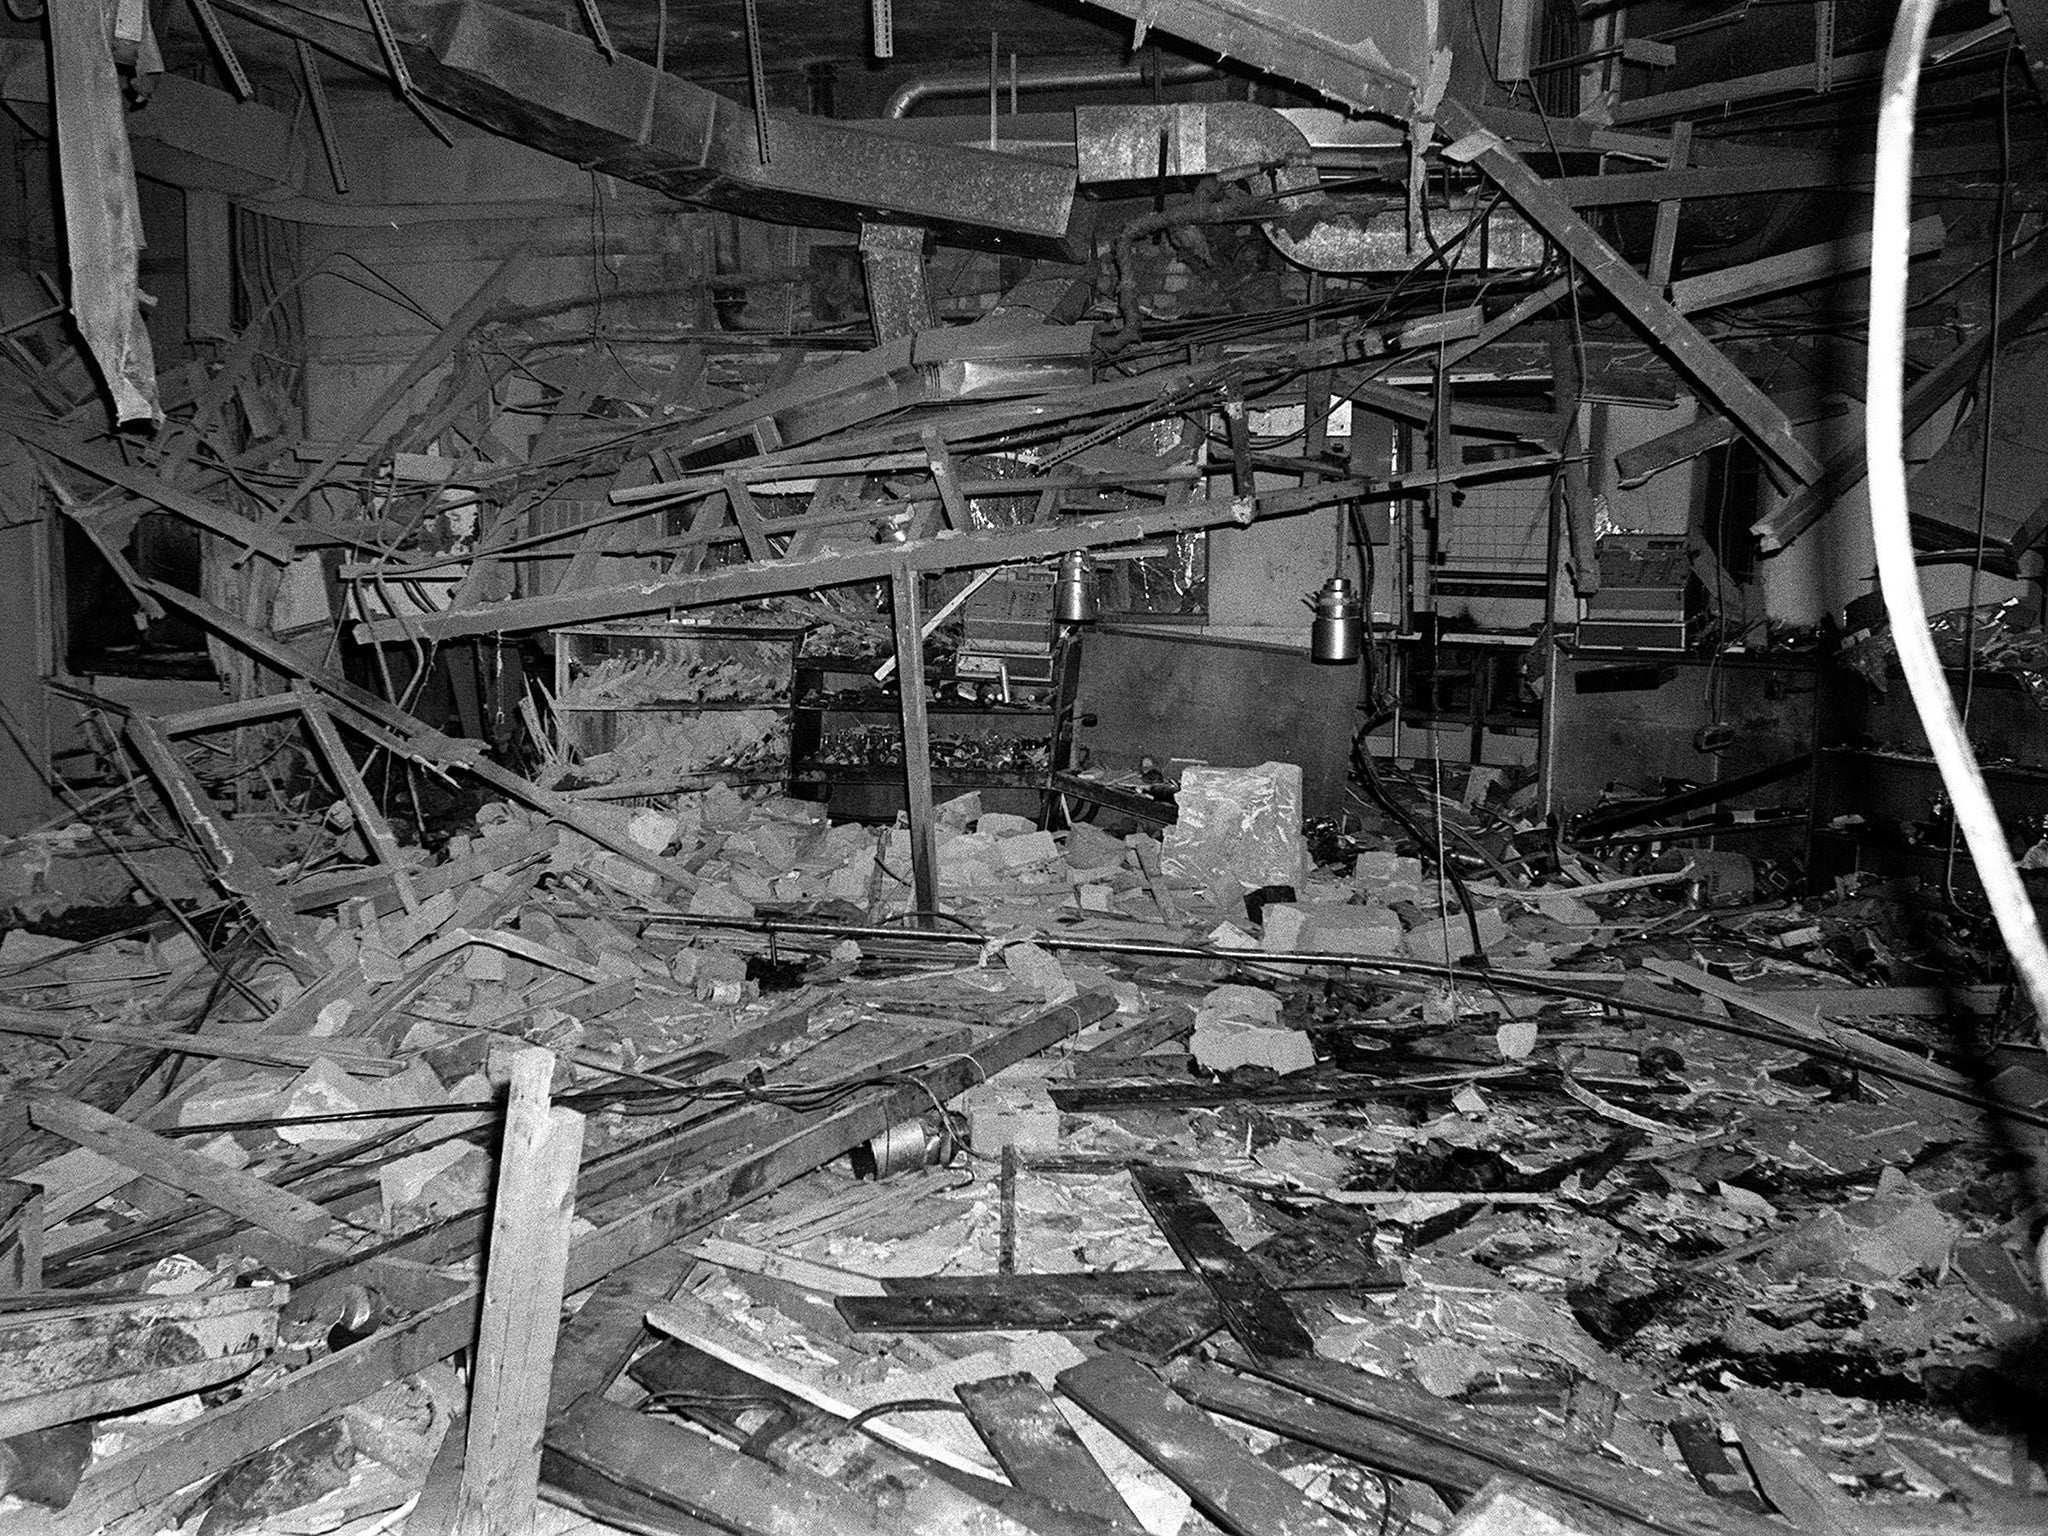 There have already been several review hearings into the 1974 bombings